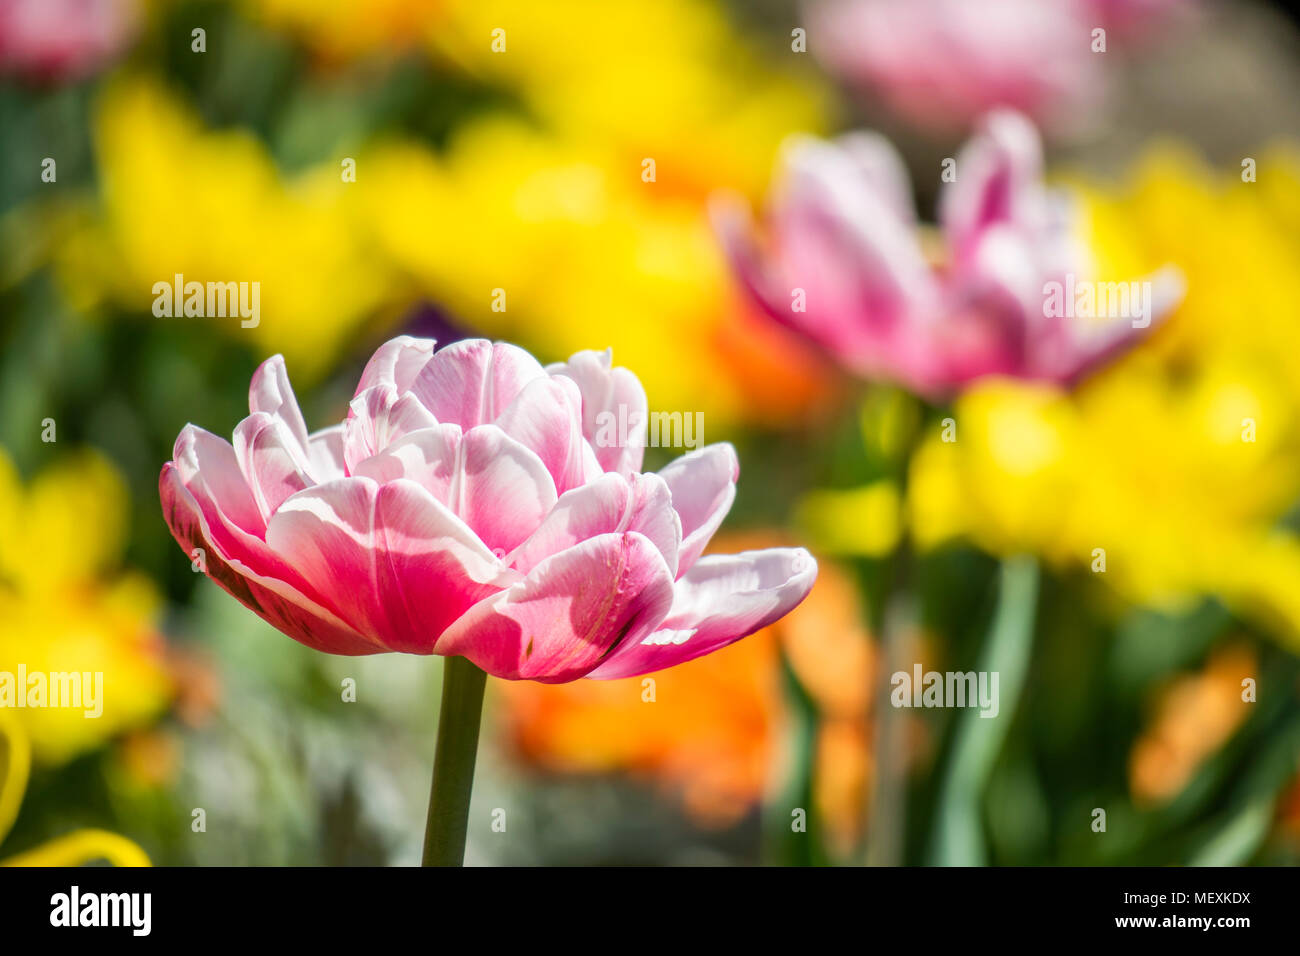 blooming double early tulips Stock Photo